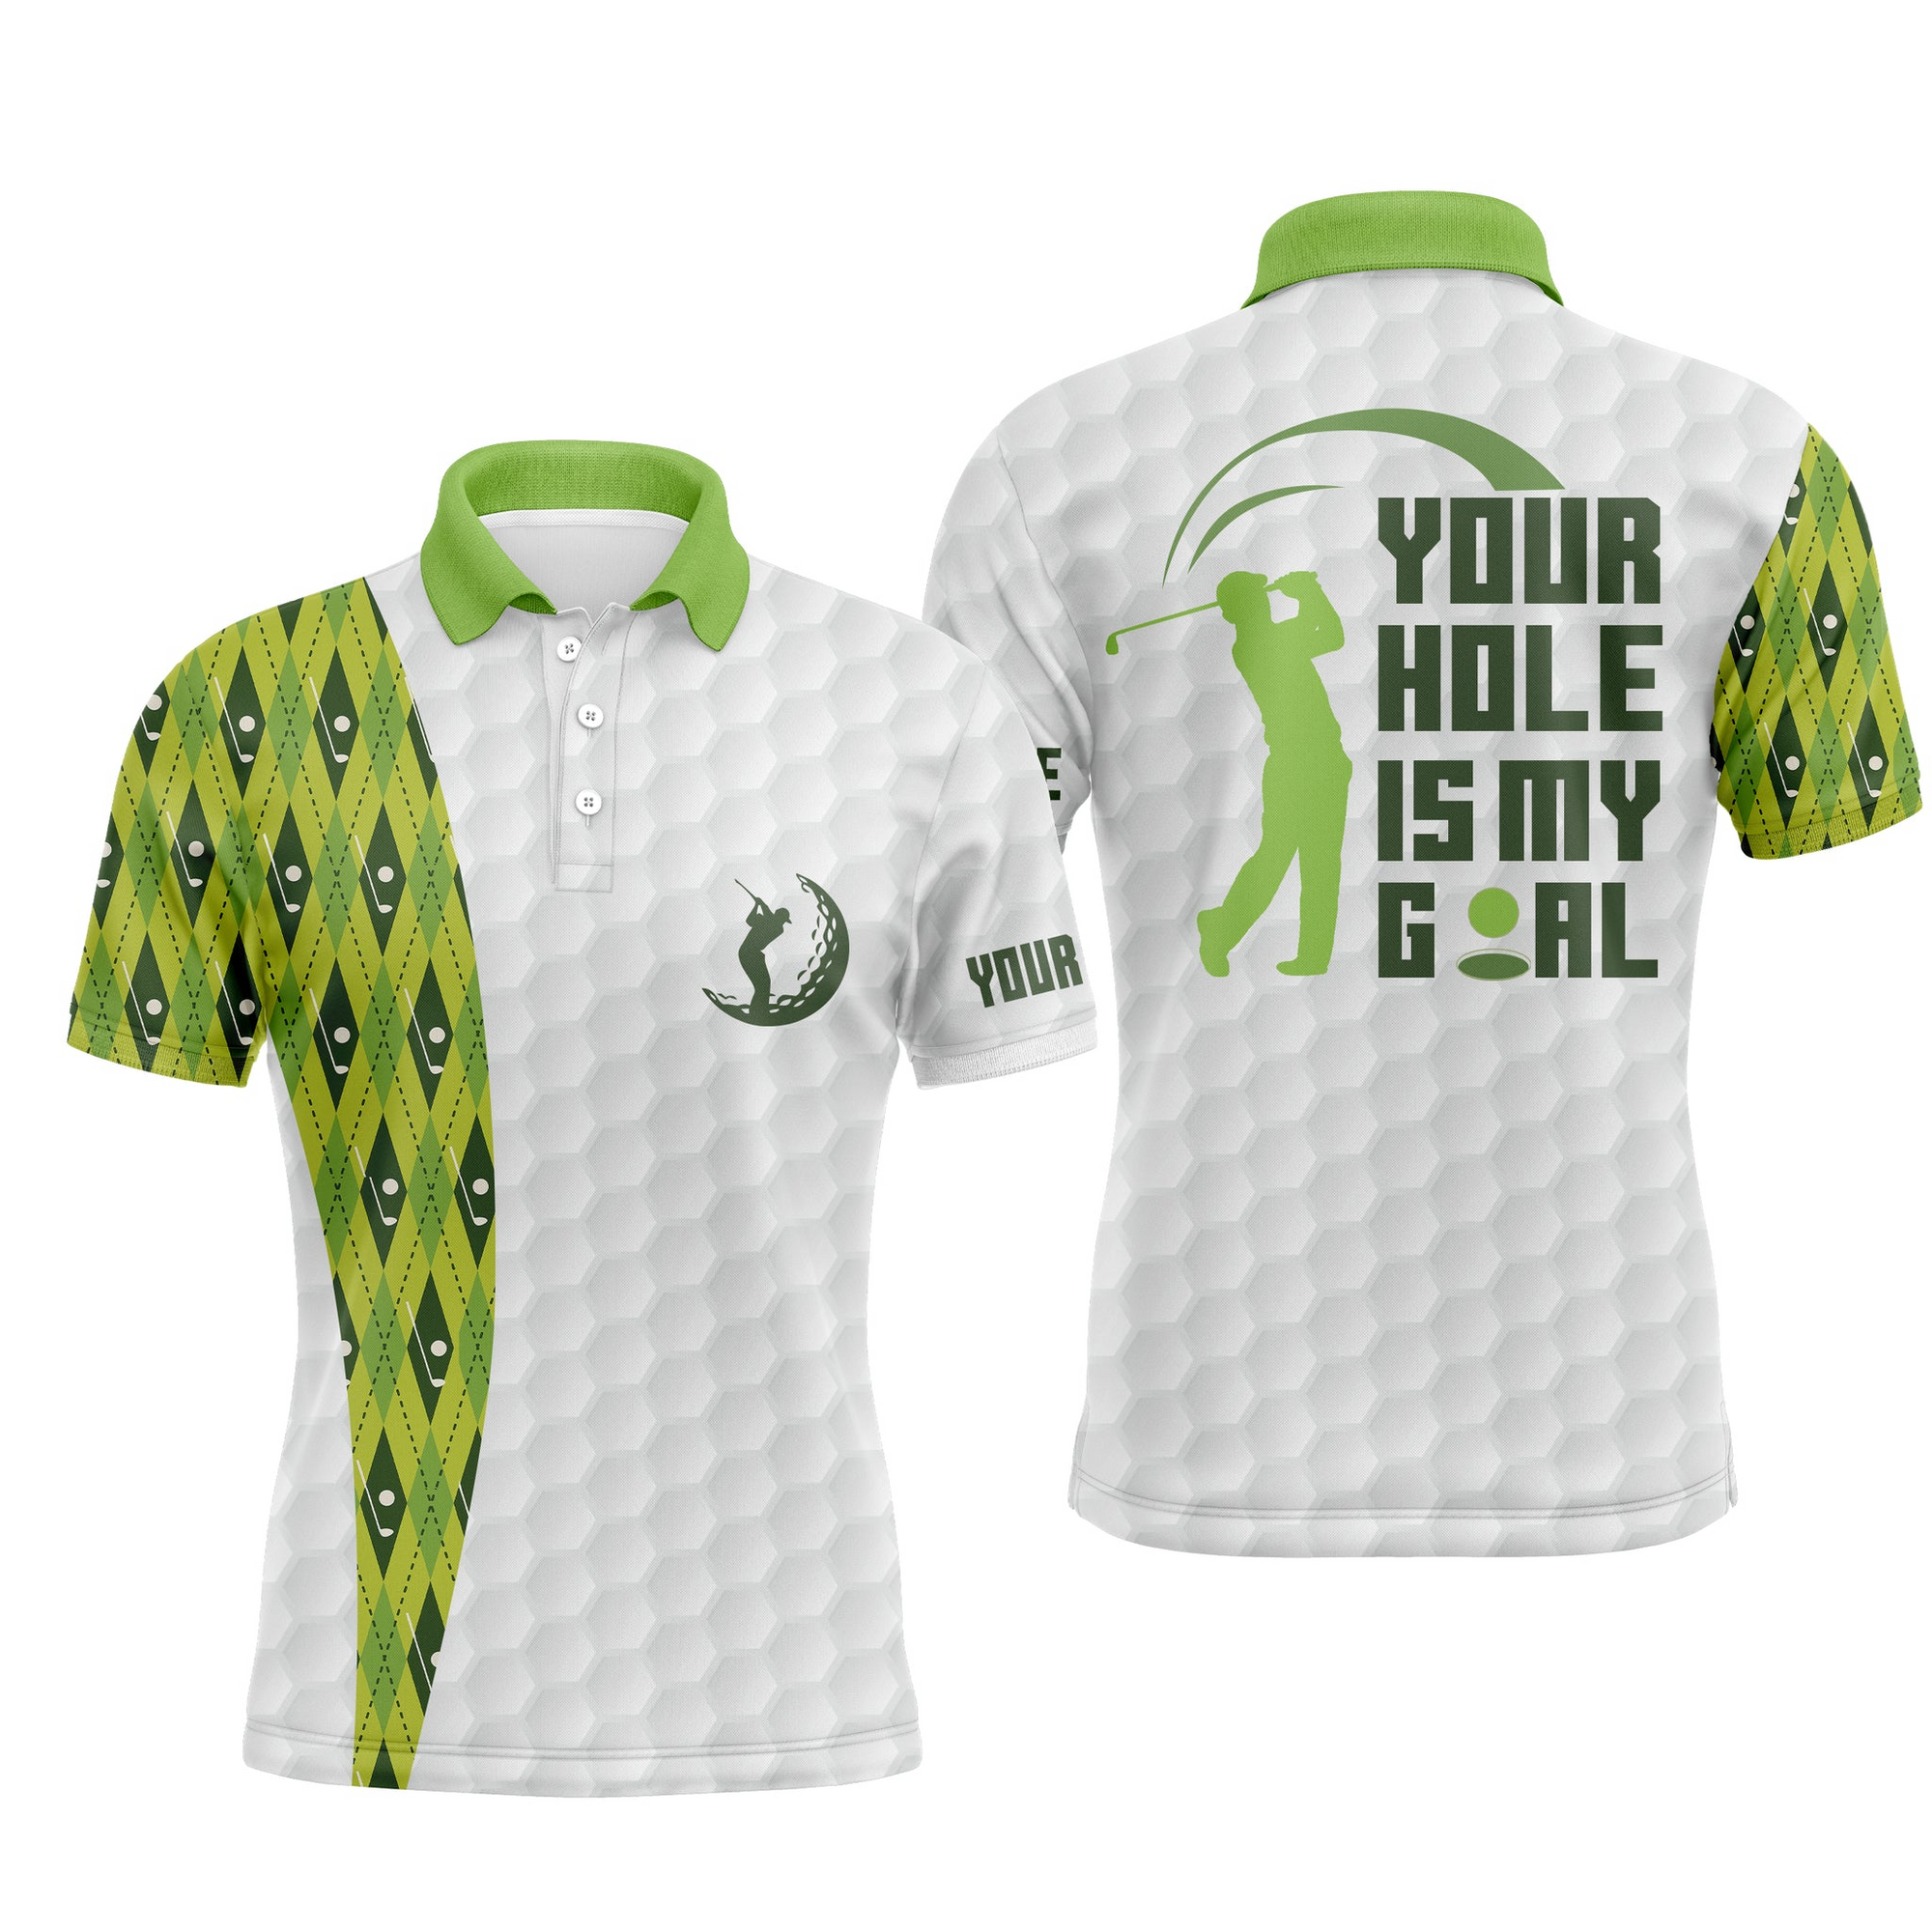 Golf Men Polo Shirts - Your Hole Is My Goal Green Argyle Pattern Polo Shirt, White And Green Golfing Shirt For Male Golfers - Perfect Gift For Men